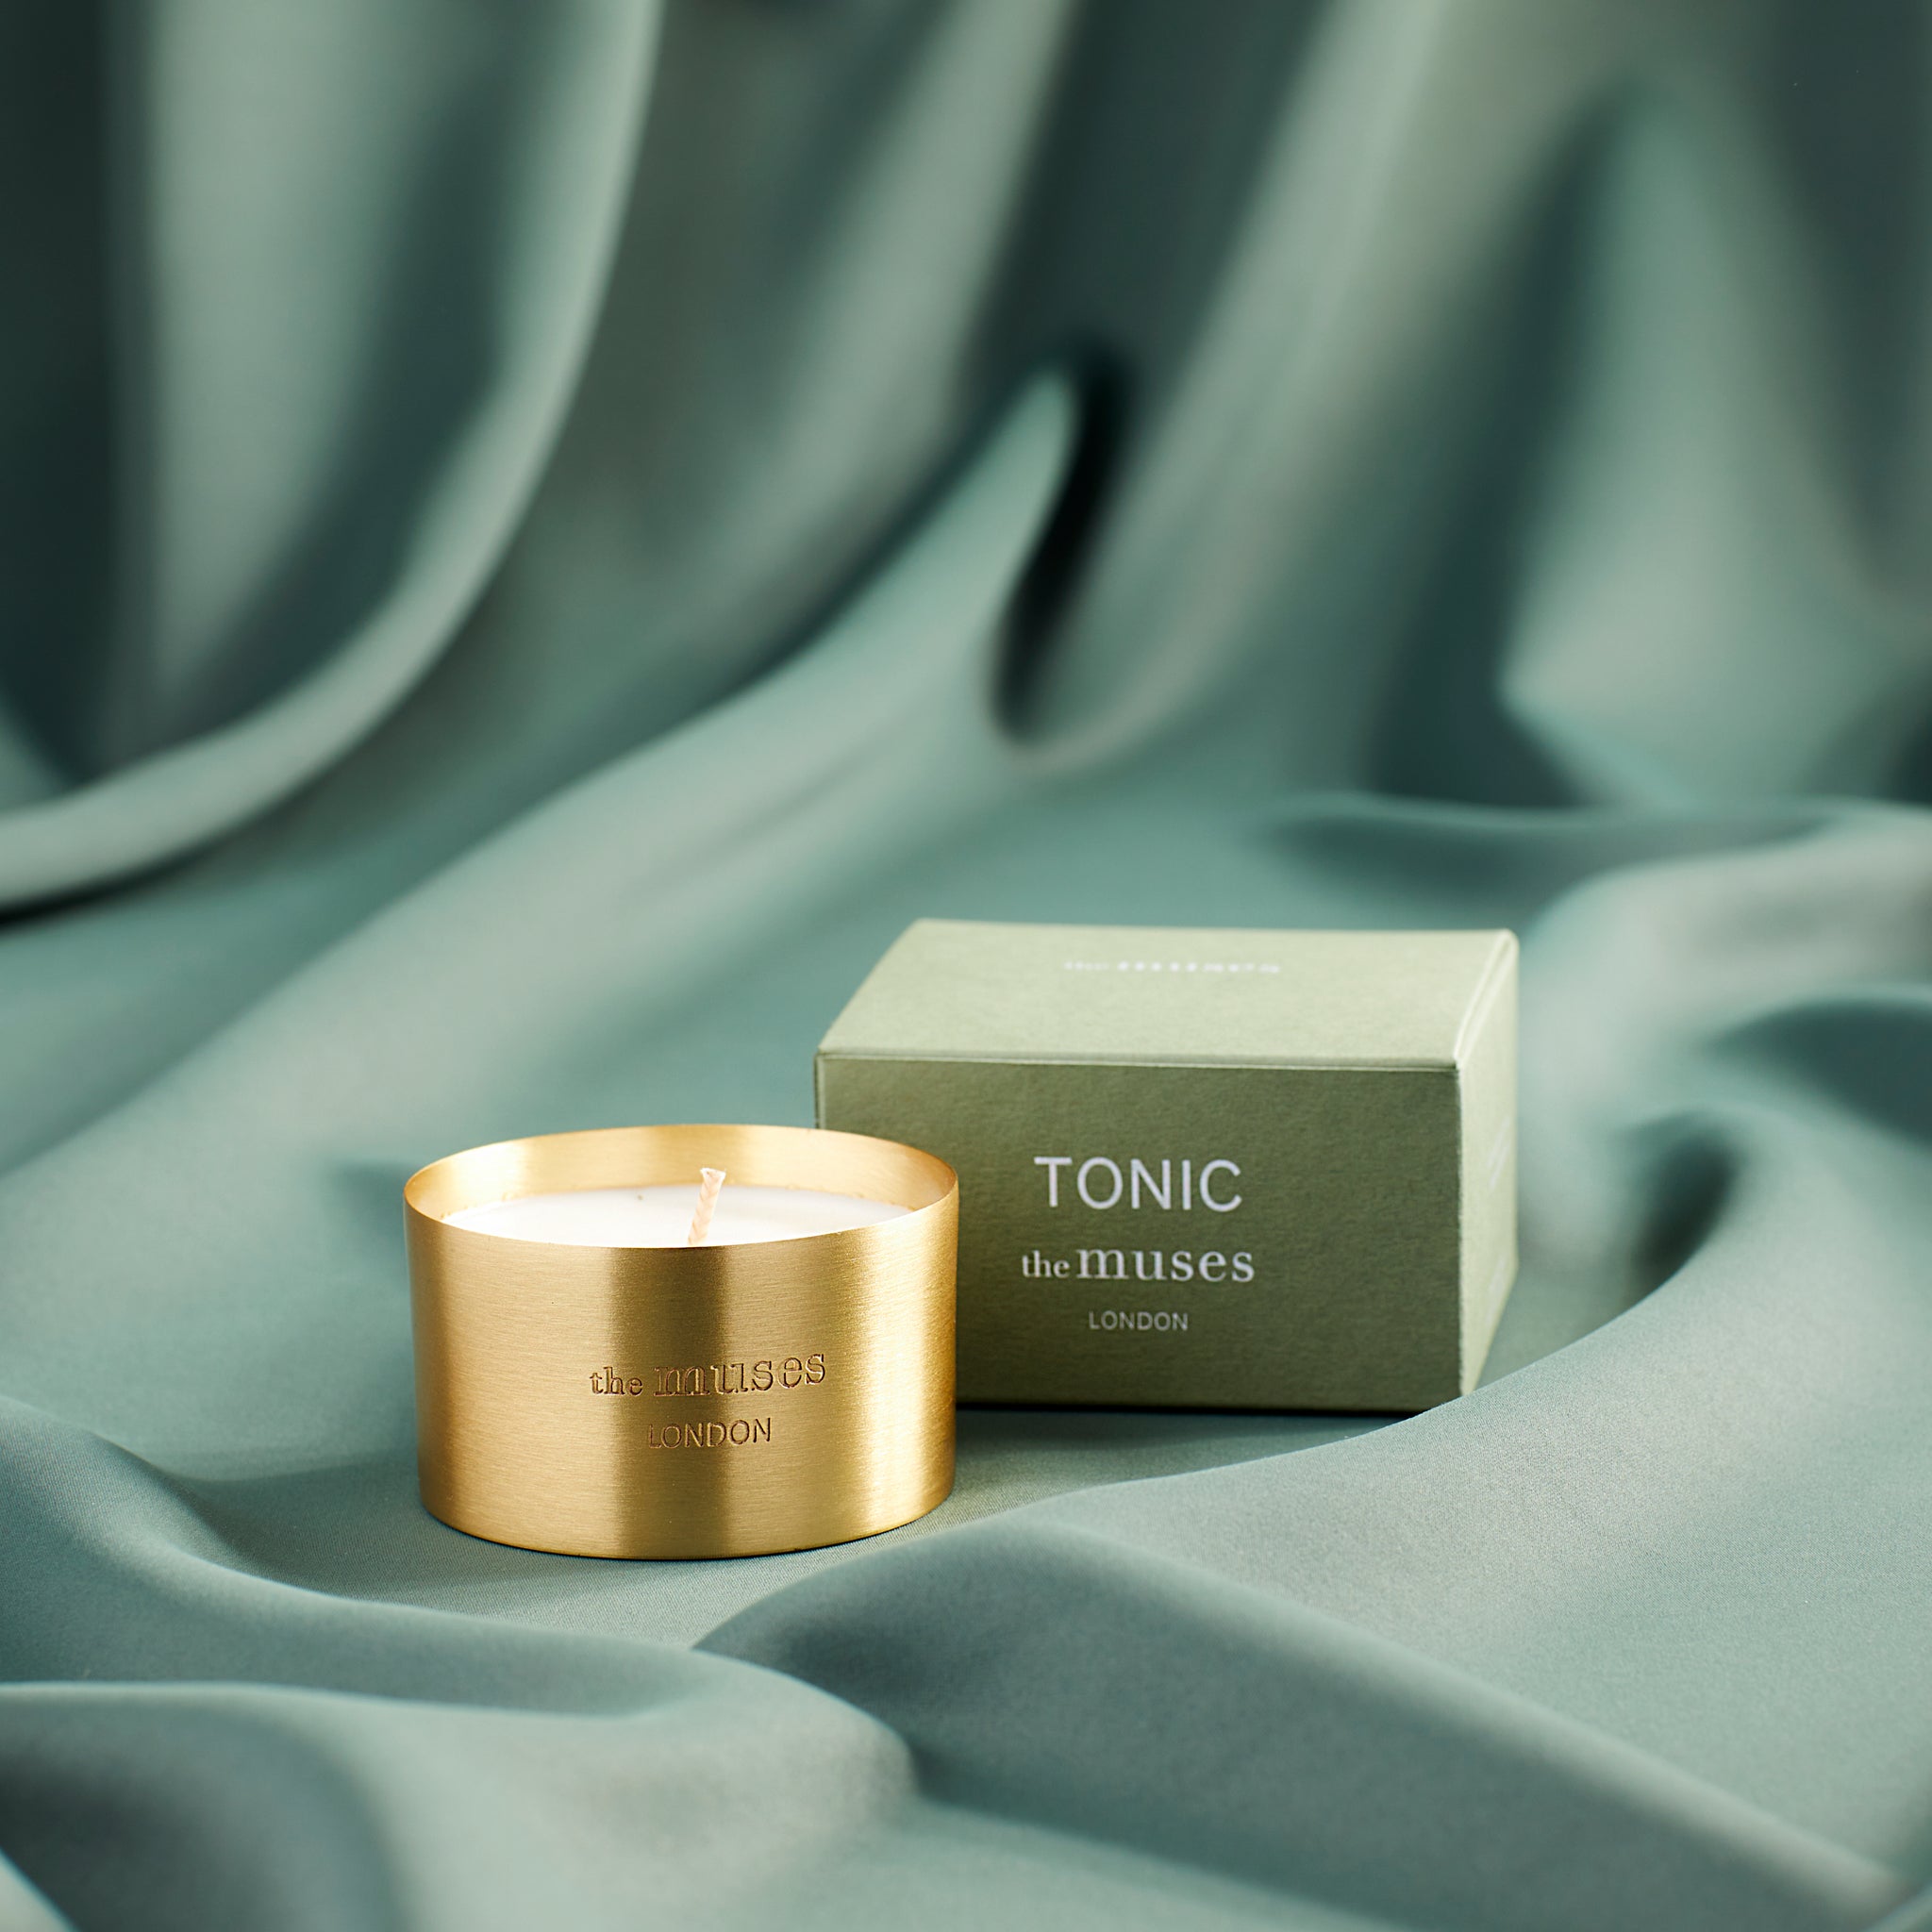 Tonic scented 100% natural wax candle 110g in pure brass container next to green candle box with closed lid. Front